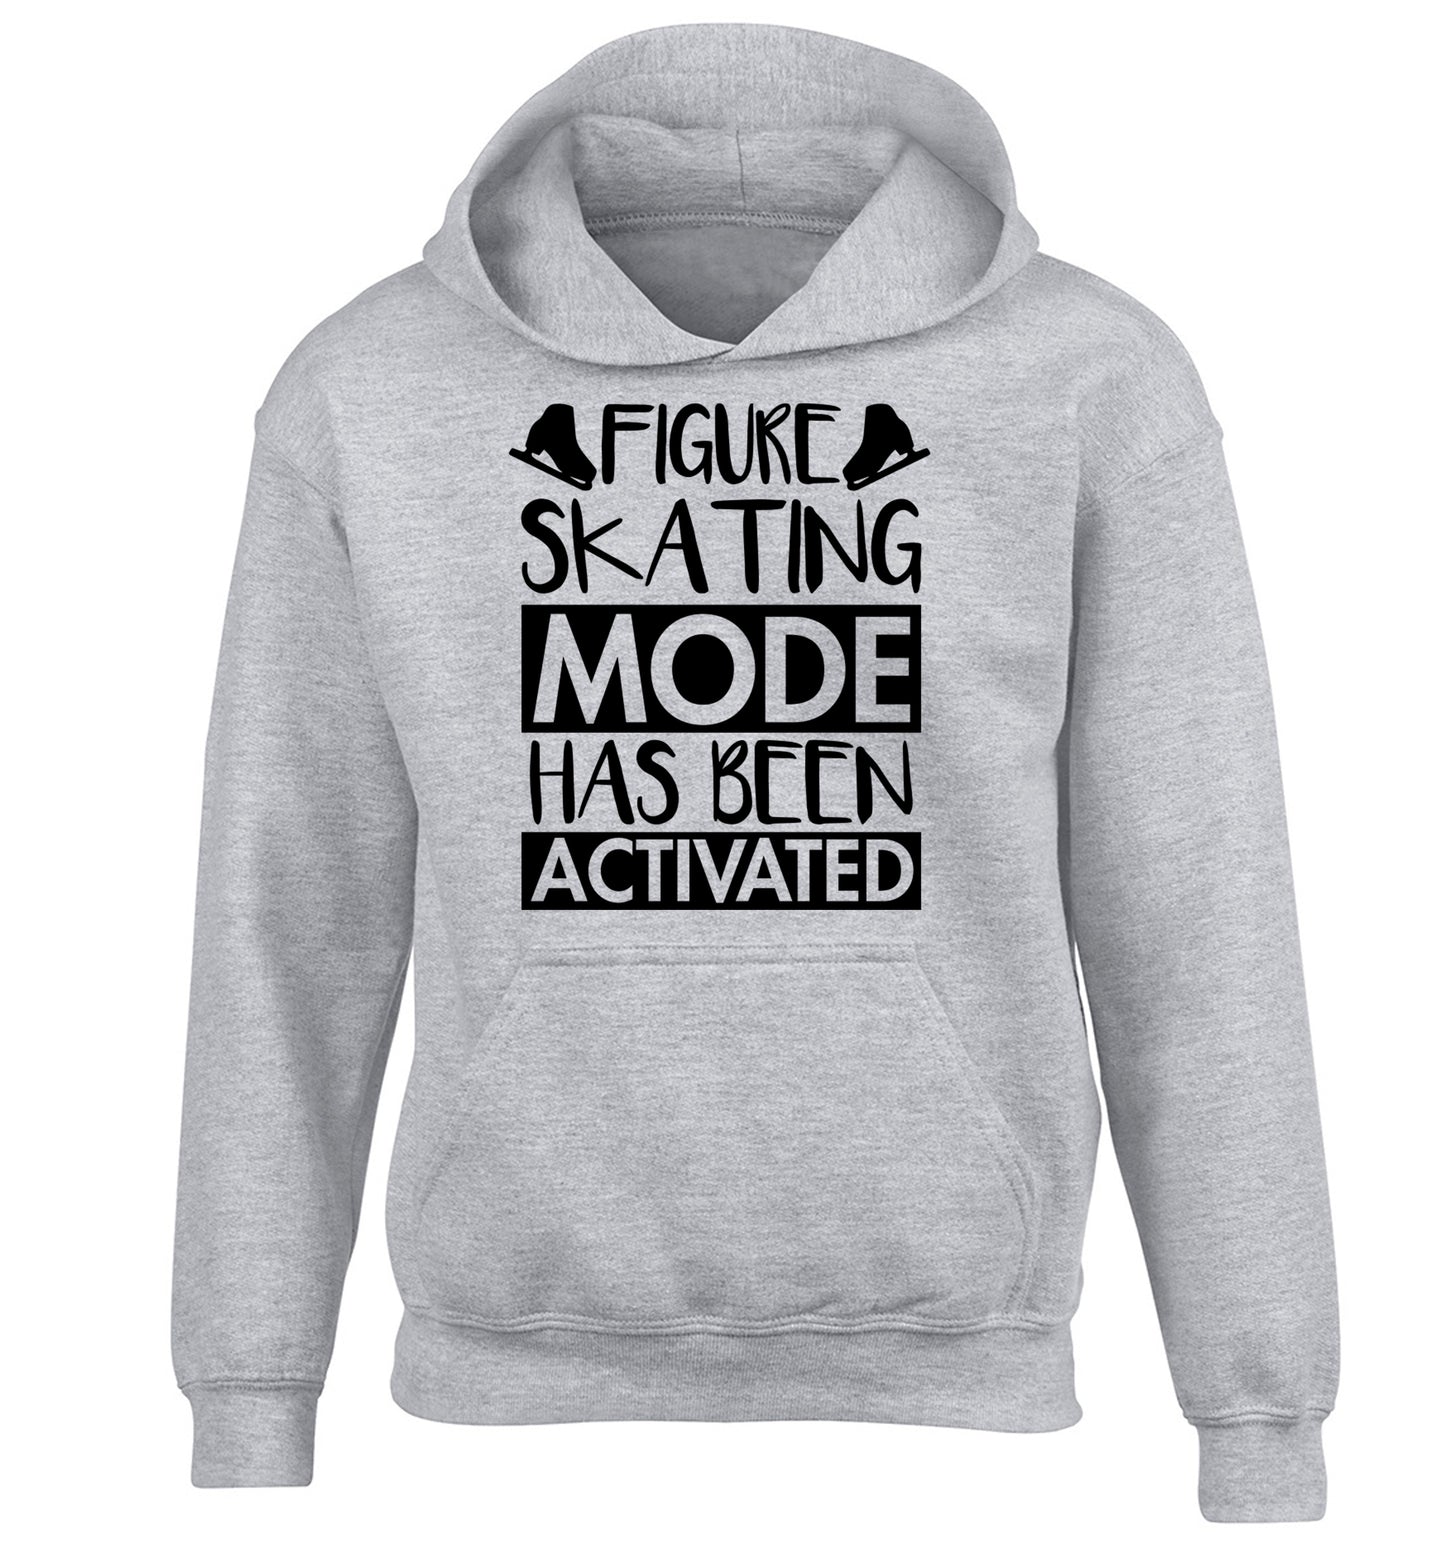 Figure skating mode activated children's grey hoodie 12-14 Years